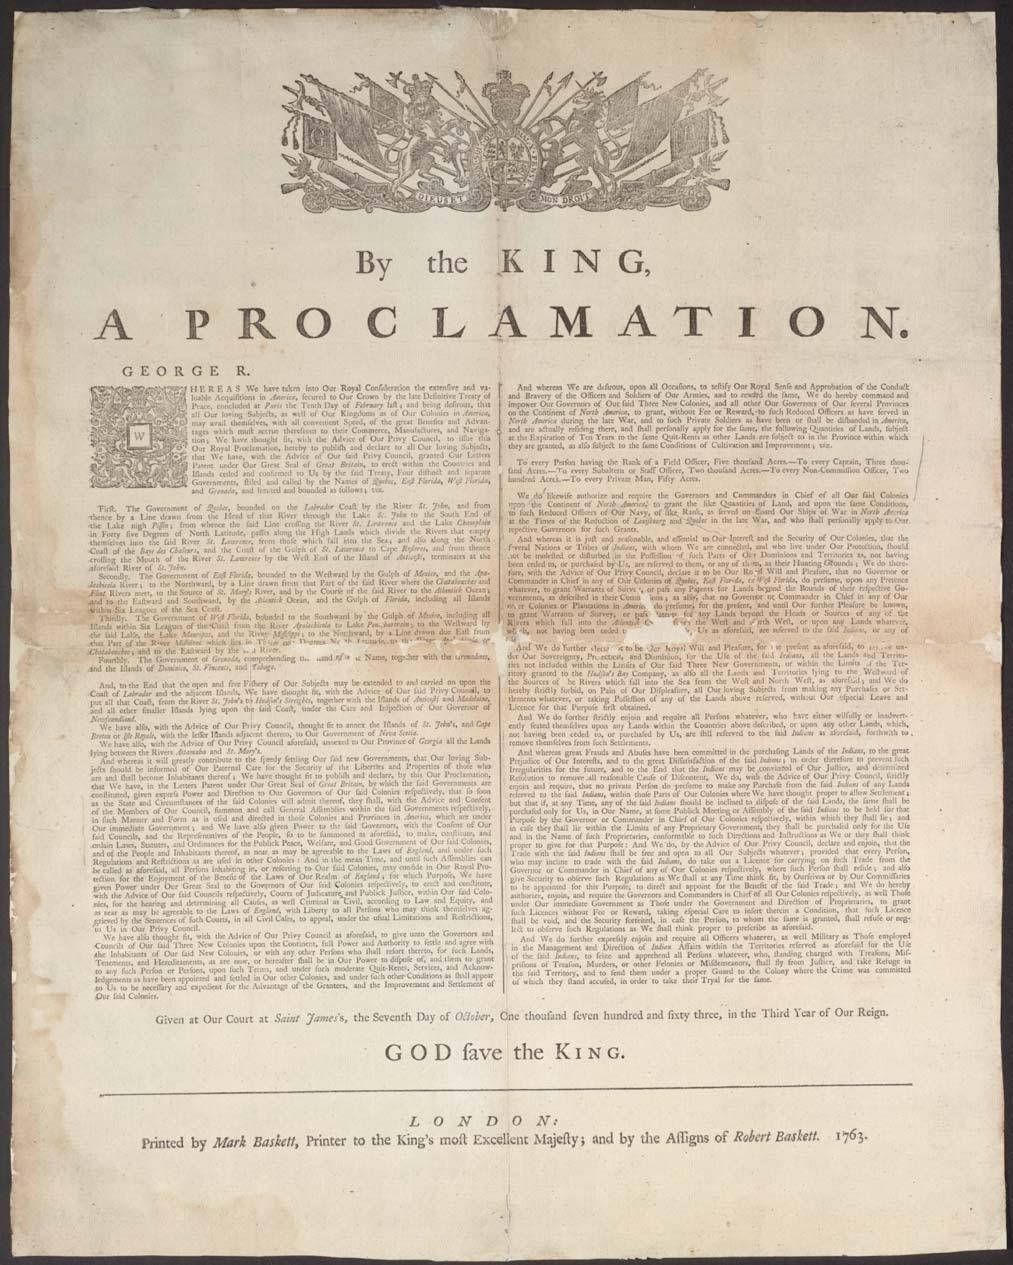 Royal Proclamation, 1763 The Royal Proclamation, 1763 administered the former French lands and addressed the concerns of First Nations over pressures on their